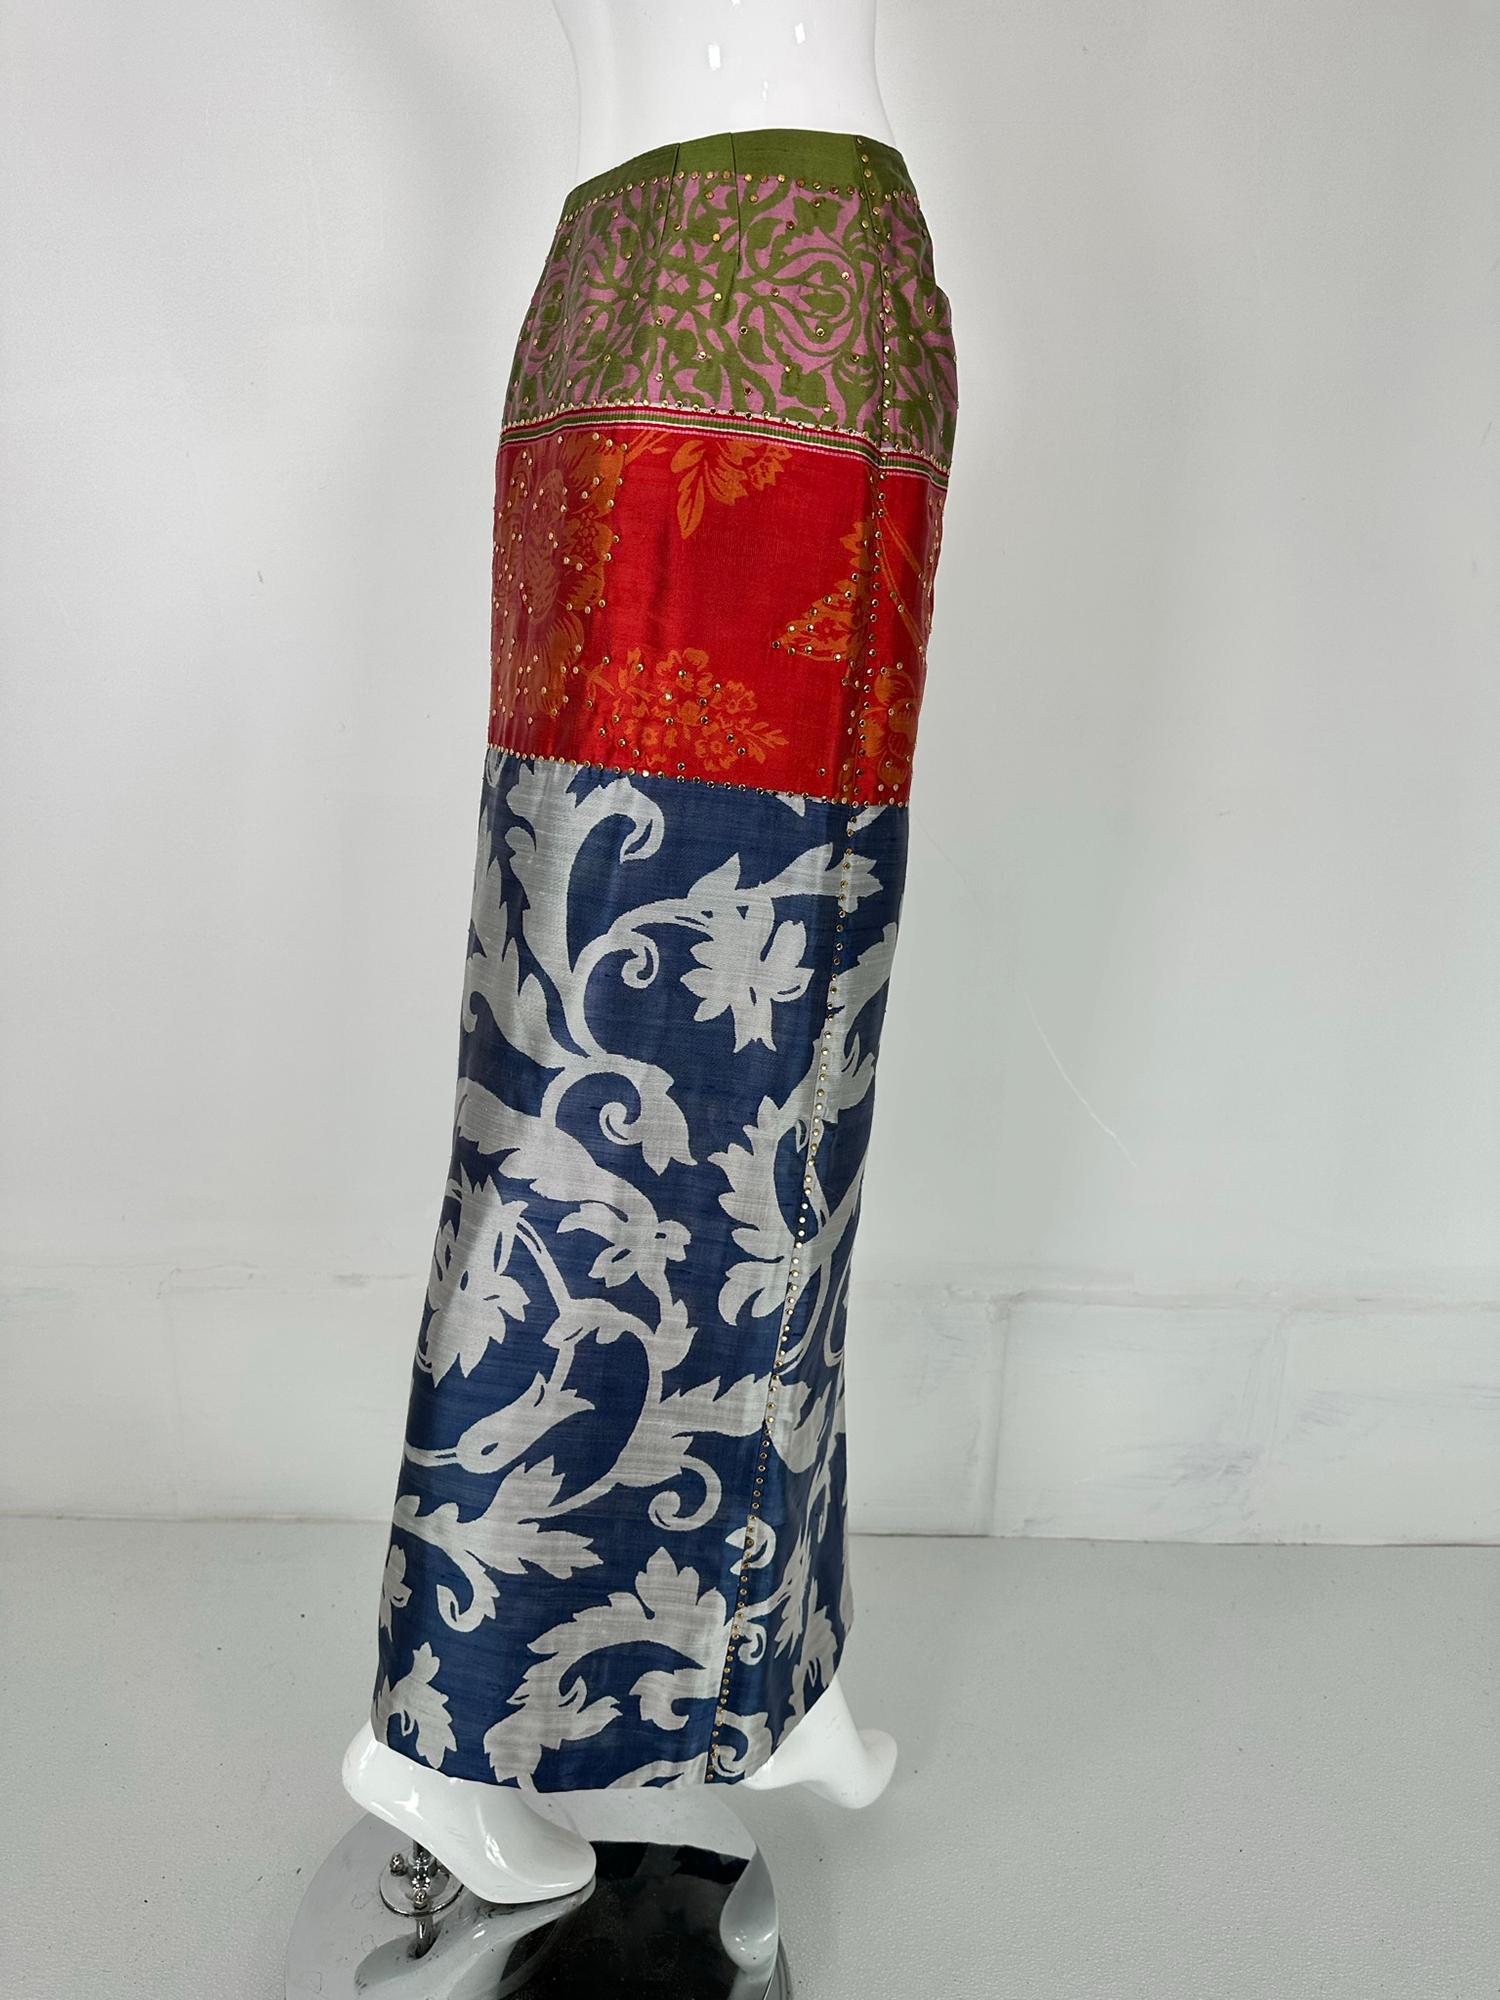 Oscar de la Renta mix print silk jean style maxi skirt with small gold studs. A beautiful mix of eye catching prints done in silk. The skirt closes at the waist center front with a fly zipper, two curved hip front pockets & a deep front hem vent.